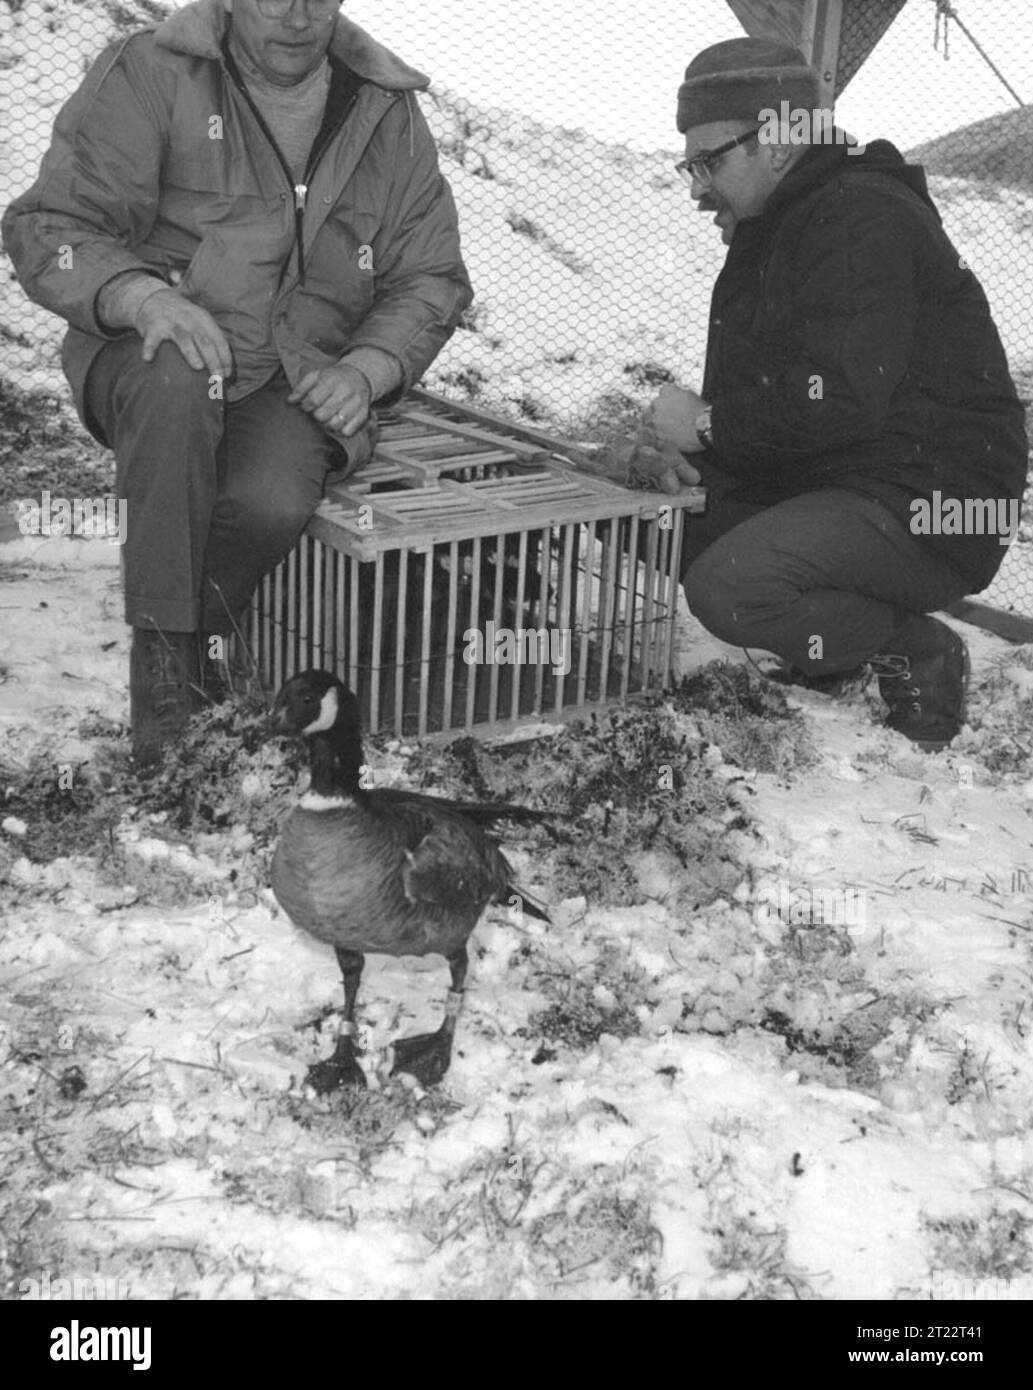 After removal of wing tape goose is released into pen. Amchitka Island Goose Release - March 1971. Subjects: Aleutians; Wildlife management; Birds; Waterfowl; Wildlife refuges; Alaska Maritime National Wildlife Refuge; Work of Service; Personnel; ARLIS; Alaska. Stock Photo